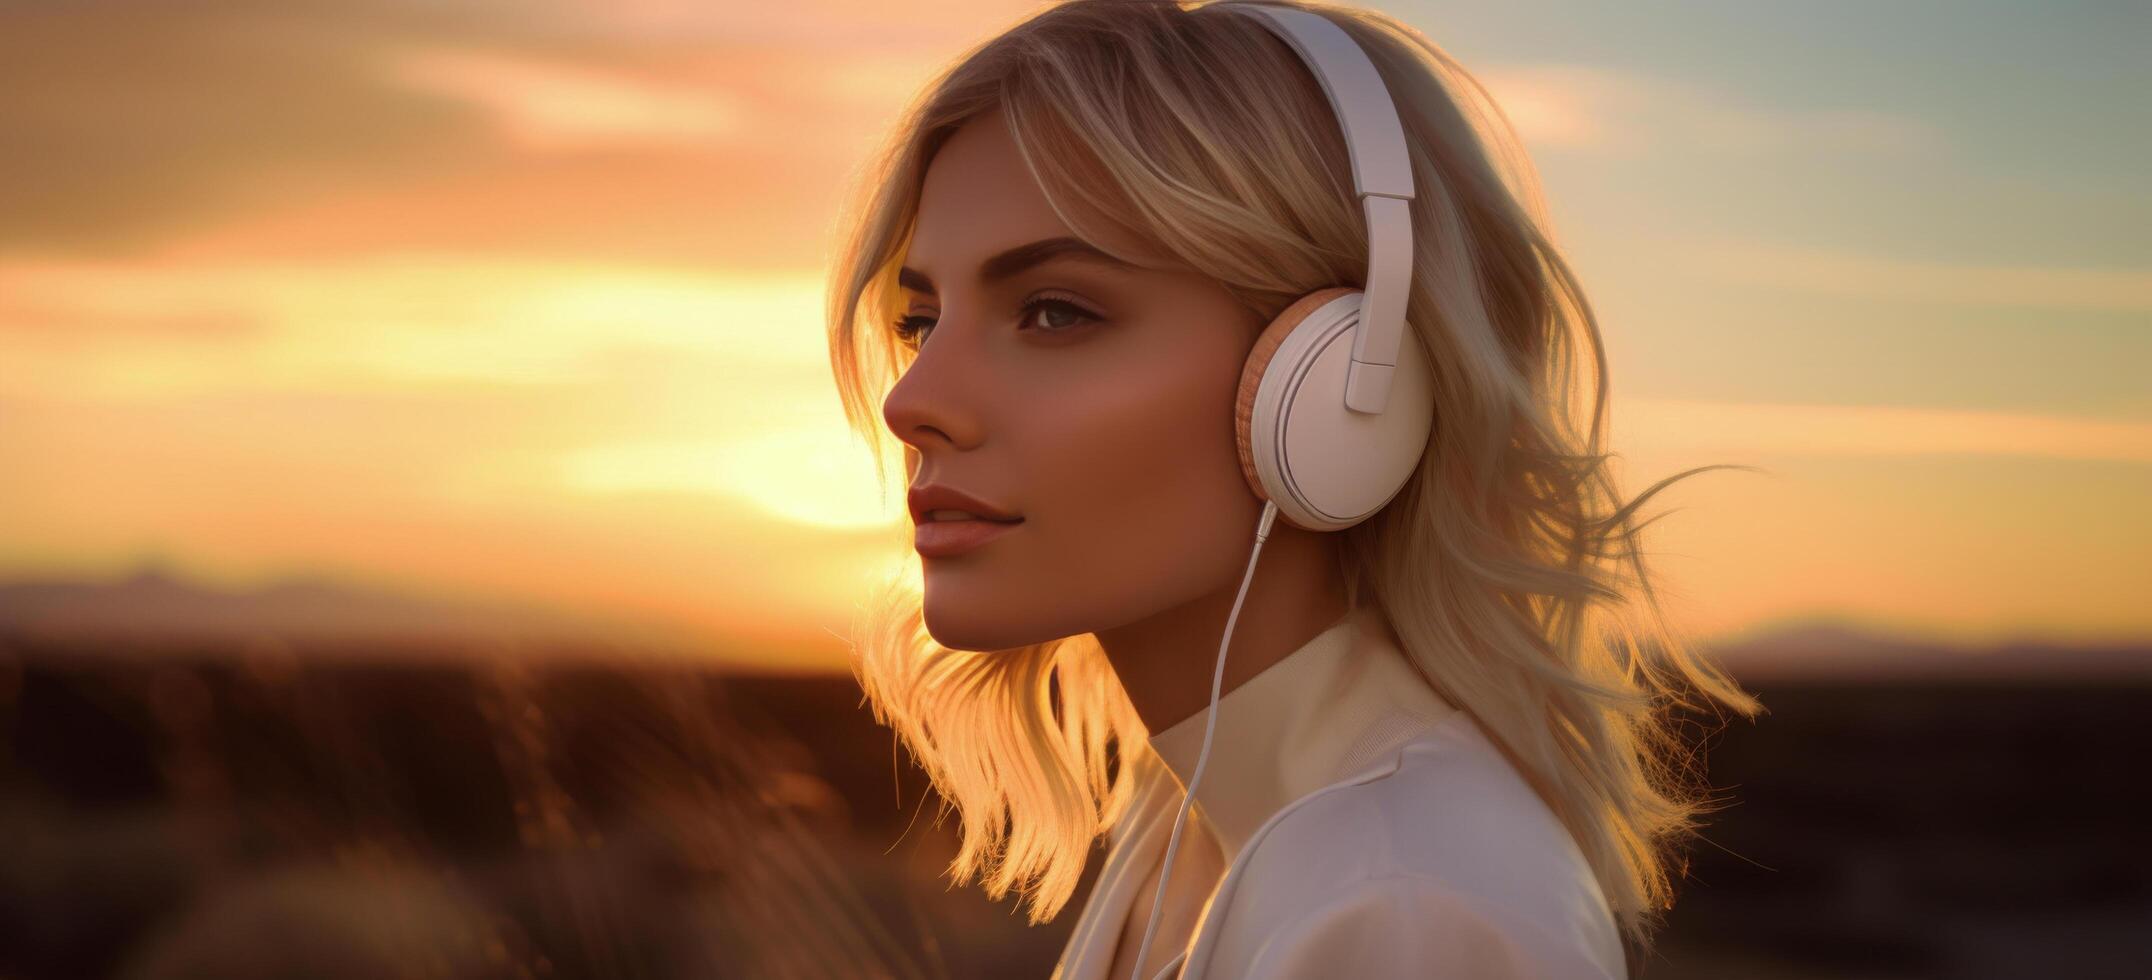 AI generated a girl wearing headphones in the background during sunset photo